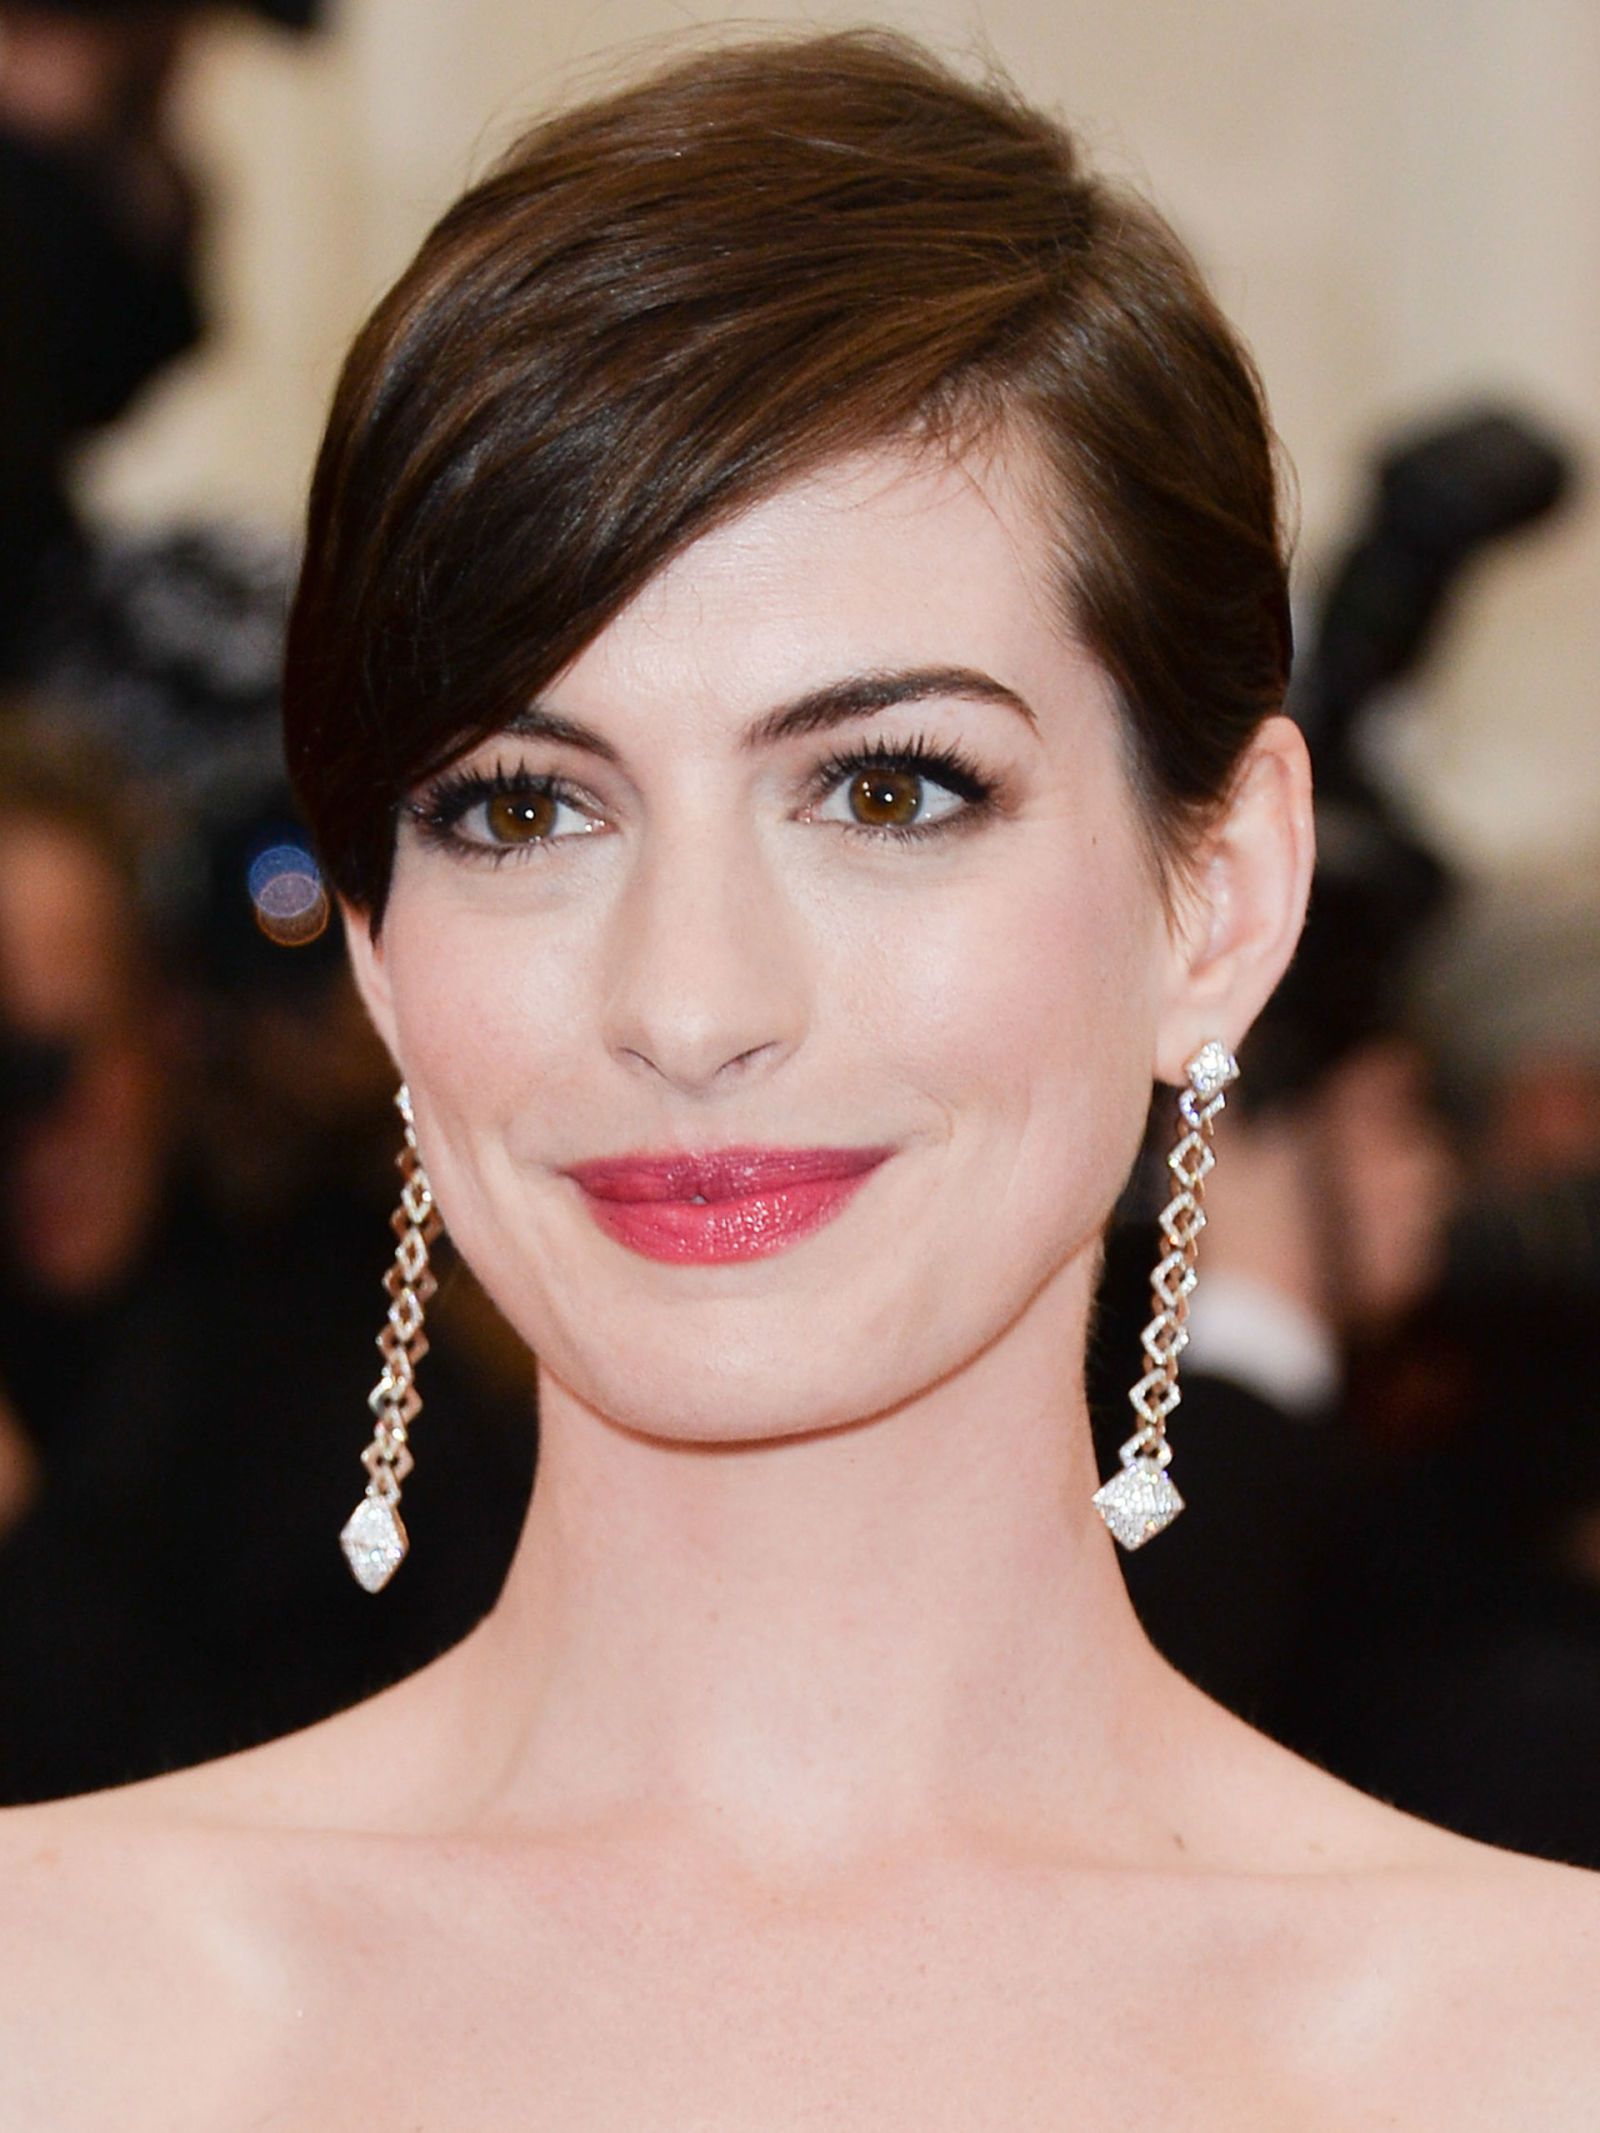 50 Short Hairstyles That Looks so Sassy : Long Pixie Straight Hair with  Long Bangs